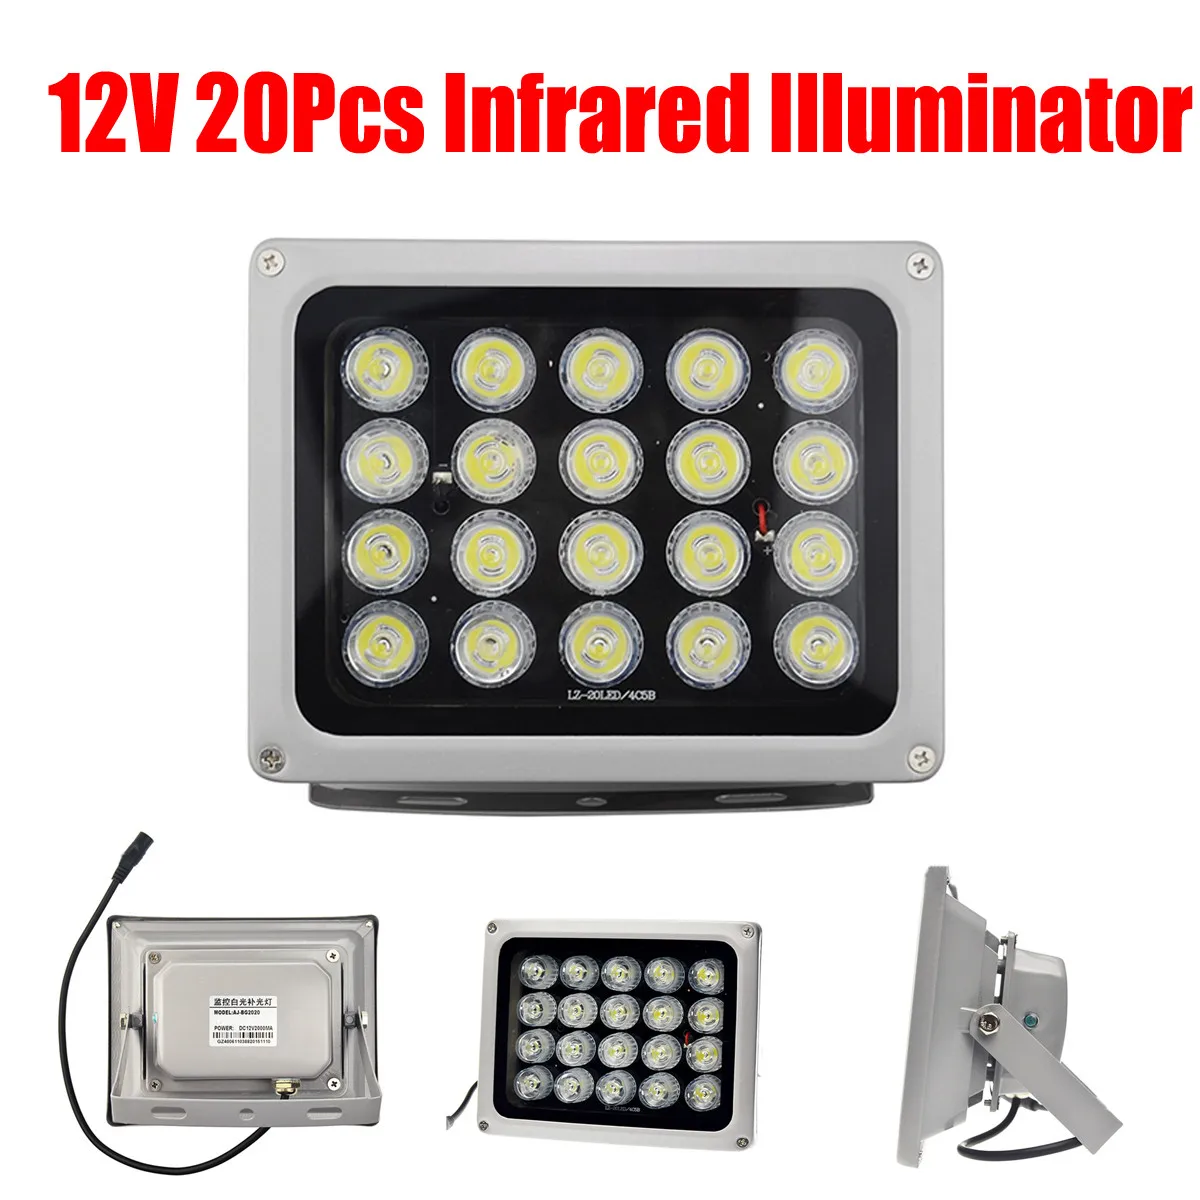 
Free Shipping 12V 90 Degree 20 LEDs IR Infrared Light Lamp IP65 850nm Waterproof Night Vision Infrared for Home CCTV Security  (62201462960)